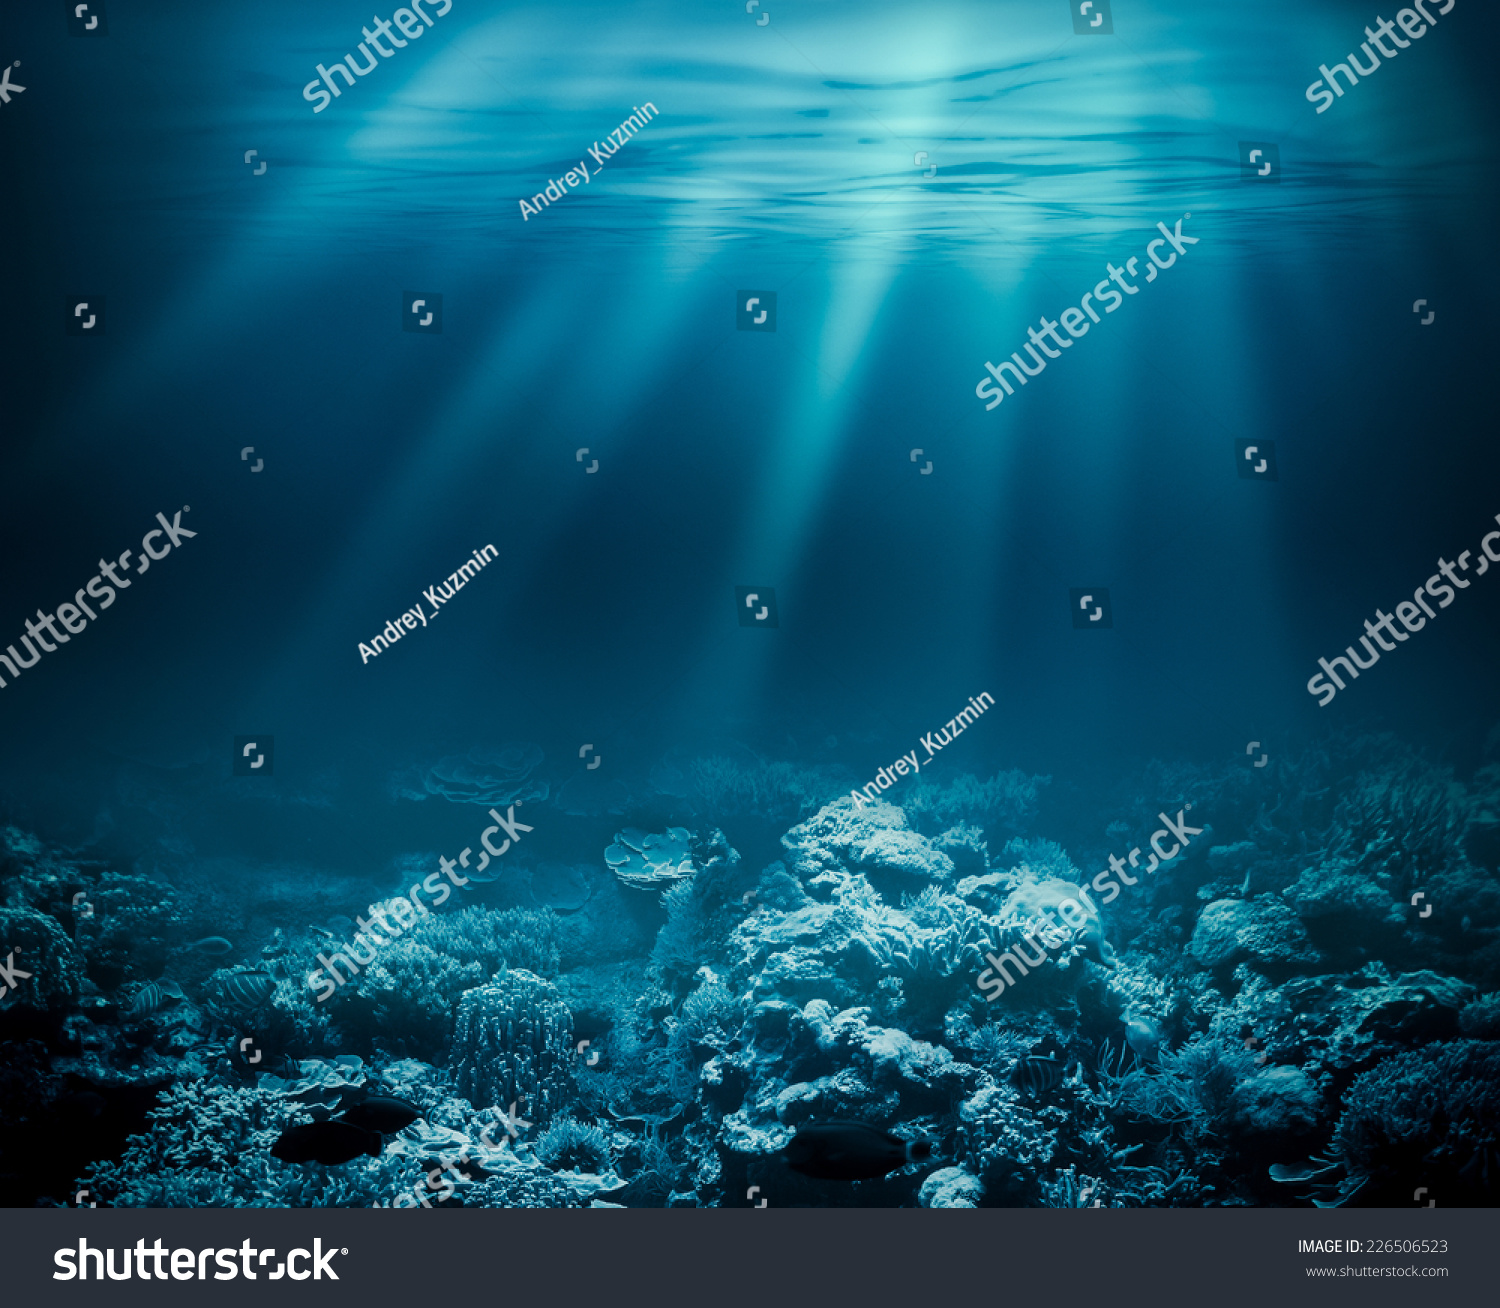 microsoft powerpoint themes free download deep sea